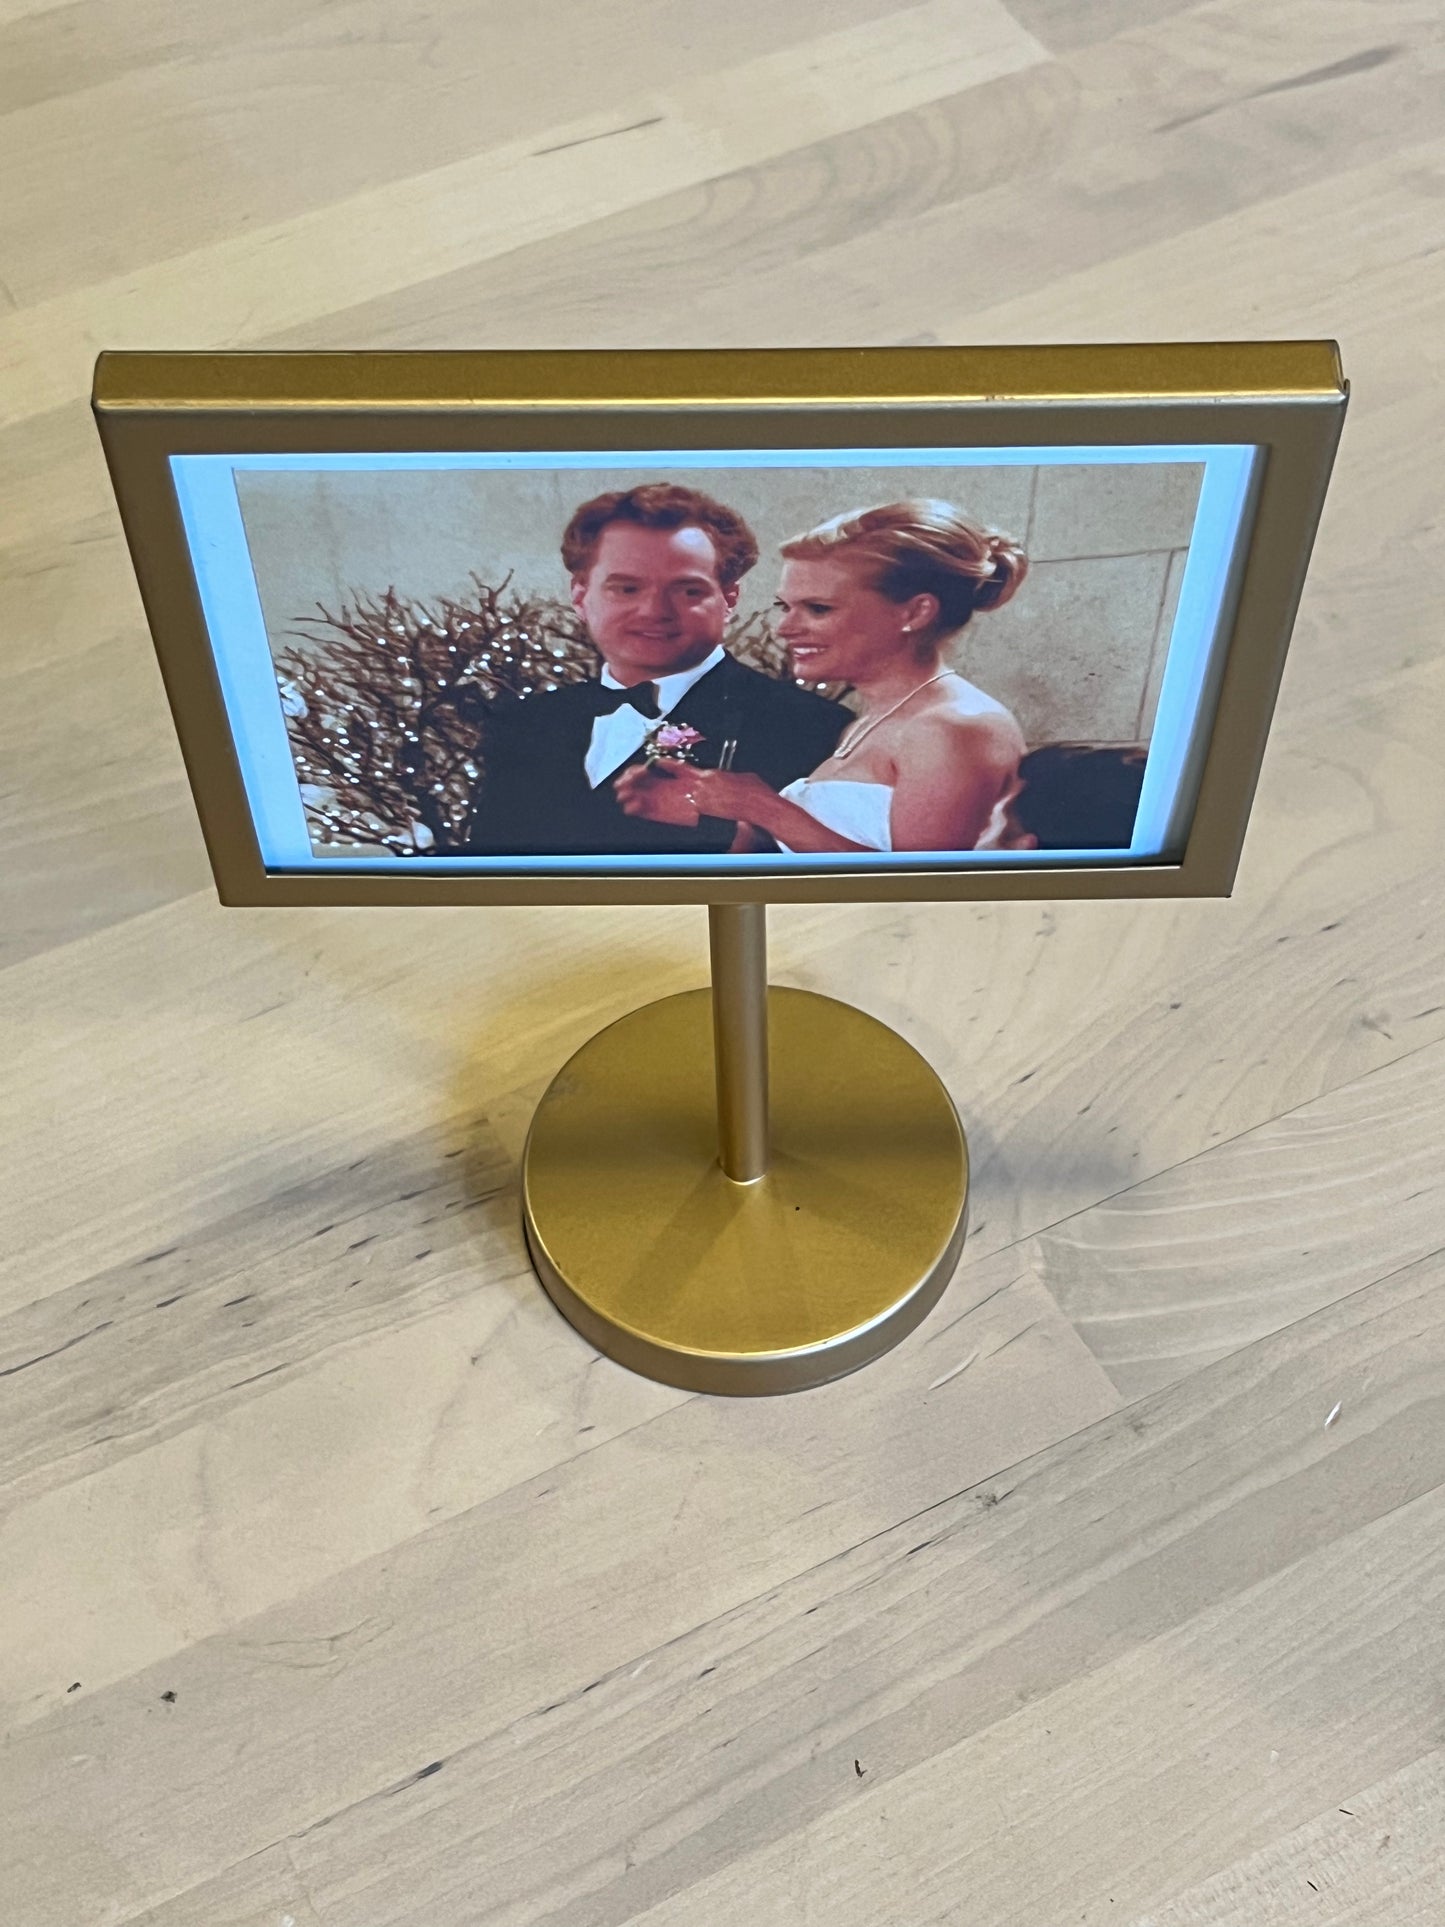 YOU'RE THE WORST: Paul and Lindsey’s Framed Wedding Picture